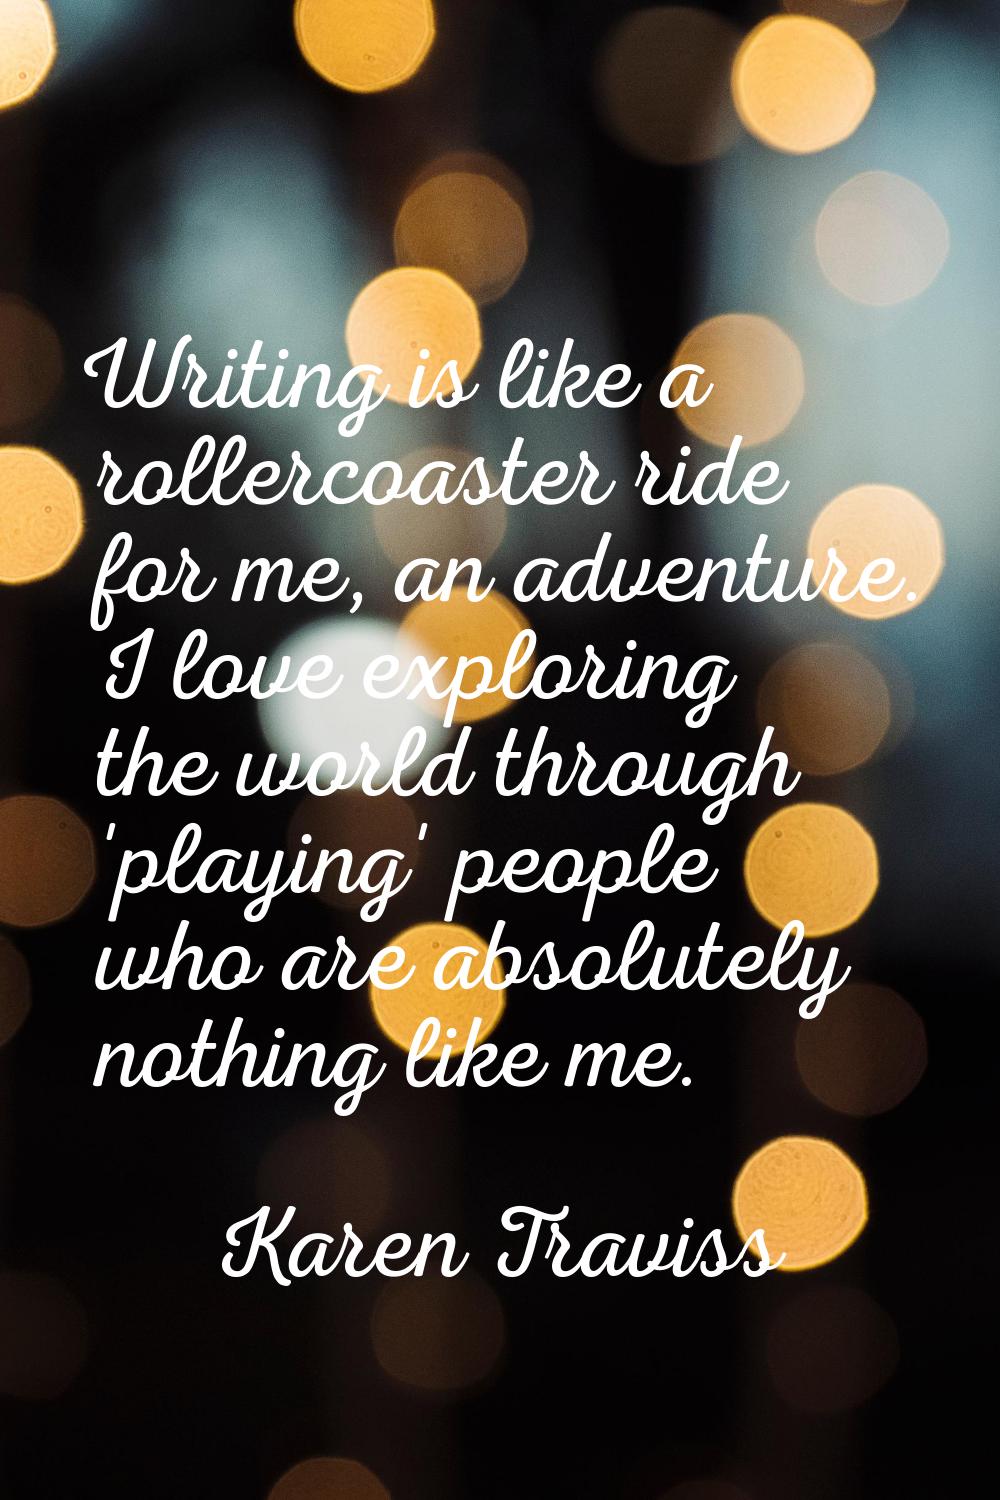 Writing is like a rollercoaster ride for me, an adventure. I love exploring the world through 'play